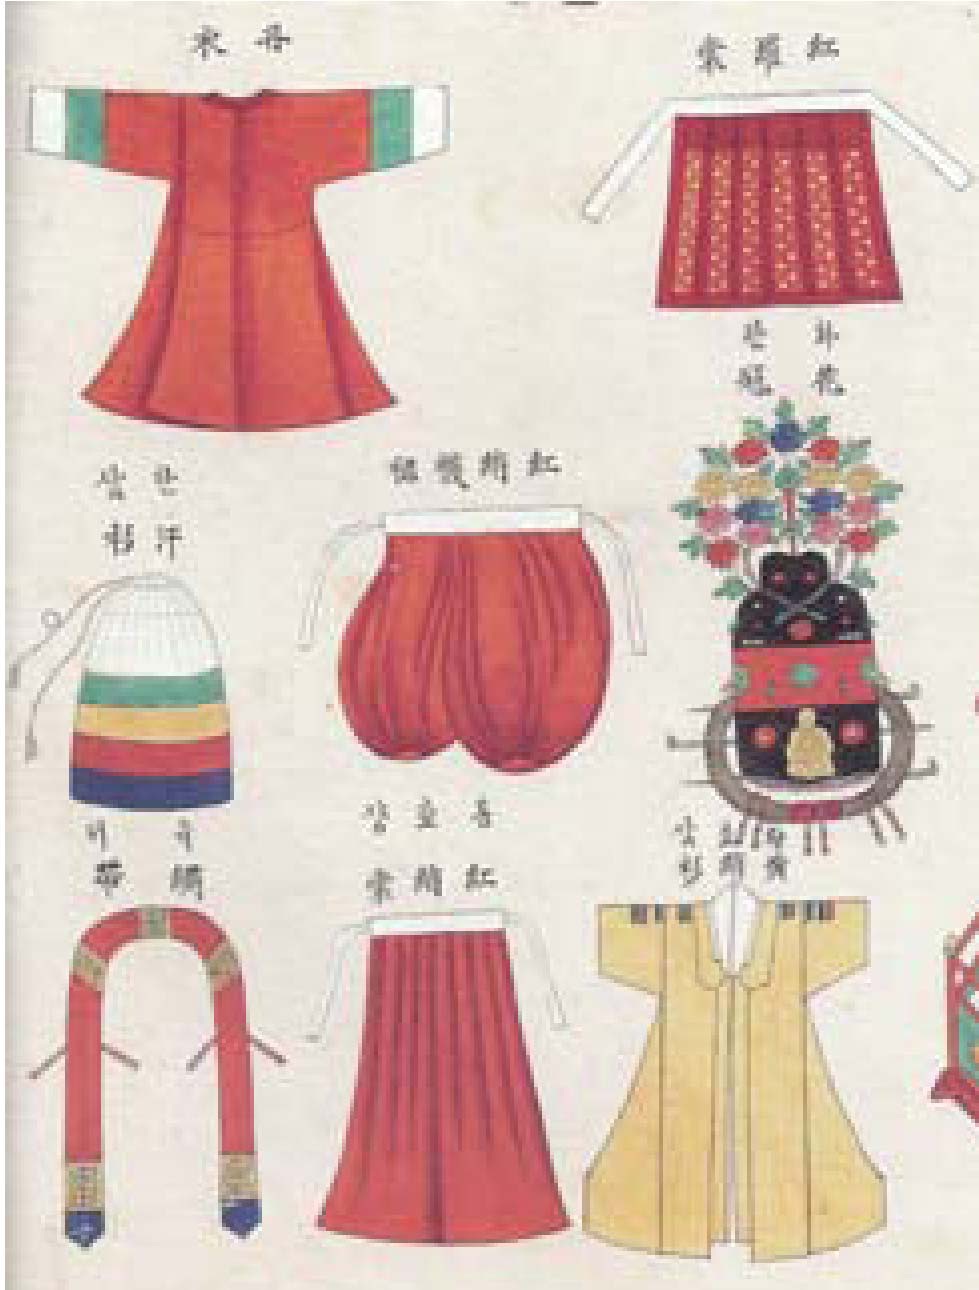 Dresses worn by female dancers,
Illustrations of record of King Jeongjo's visit to his
father's tomb, 19C, National Museum of Korea
(2012), p. 159.